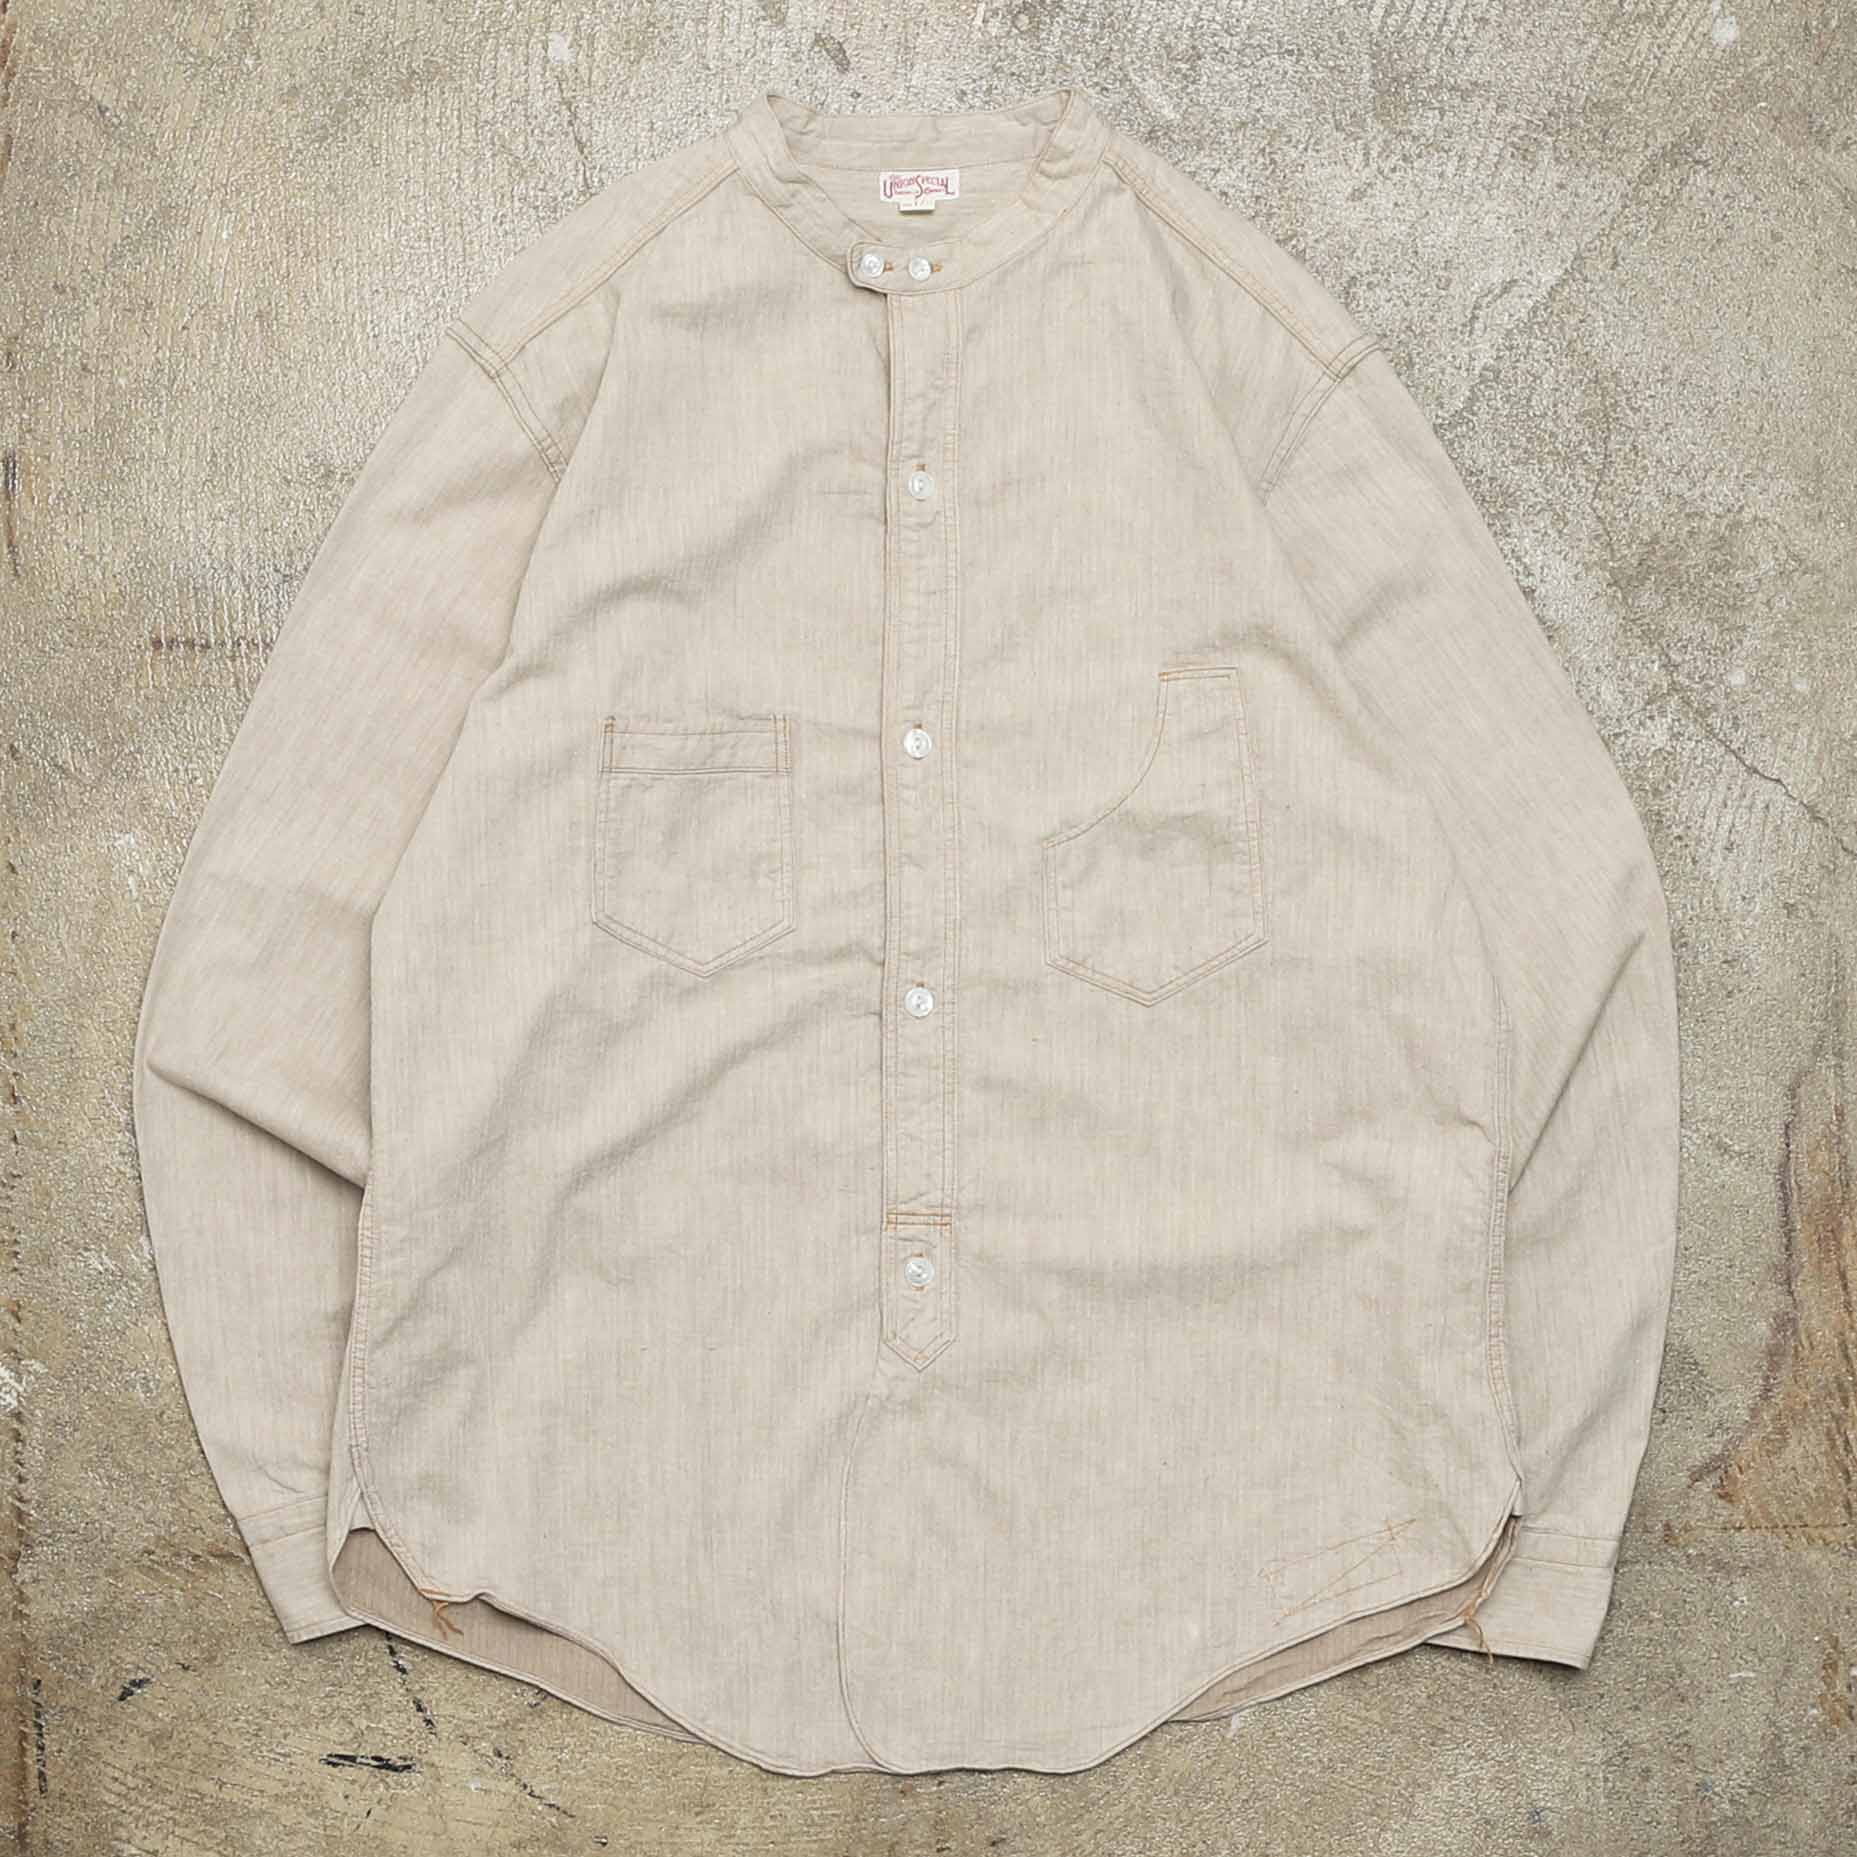 FREEWHEELERS UNION SPECIAL OVERALLS CHINA COLLAR L/S SHIRT - BEIGE